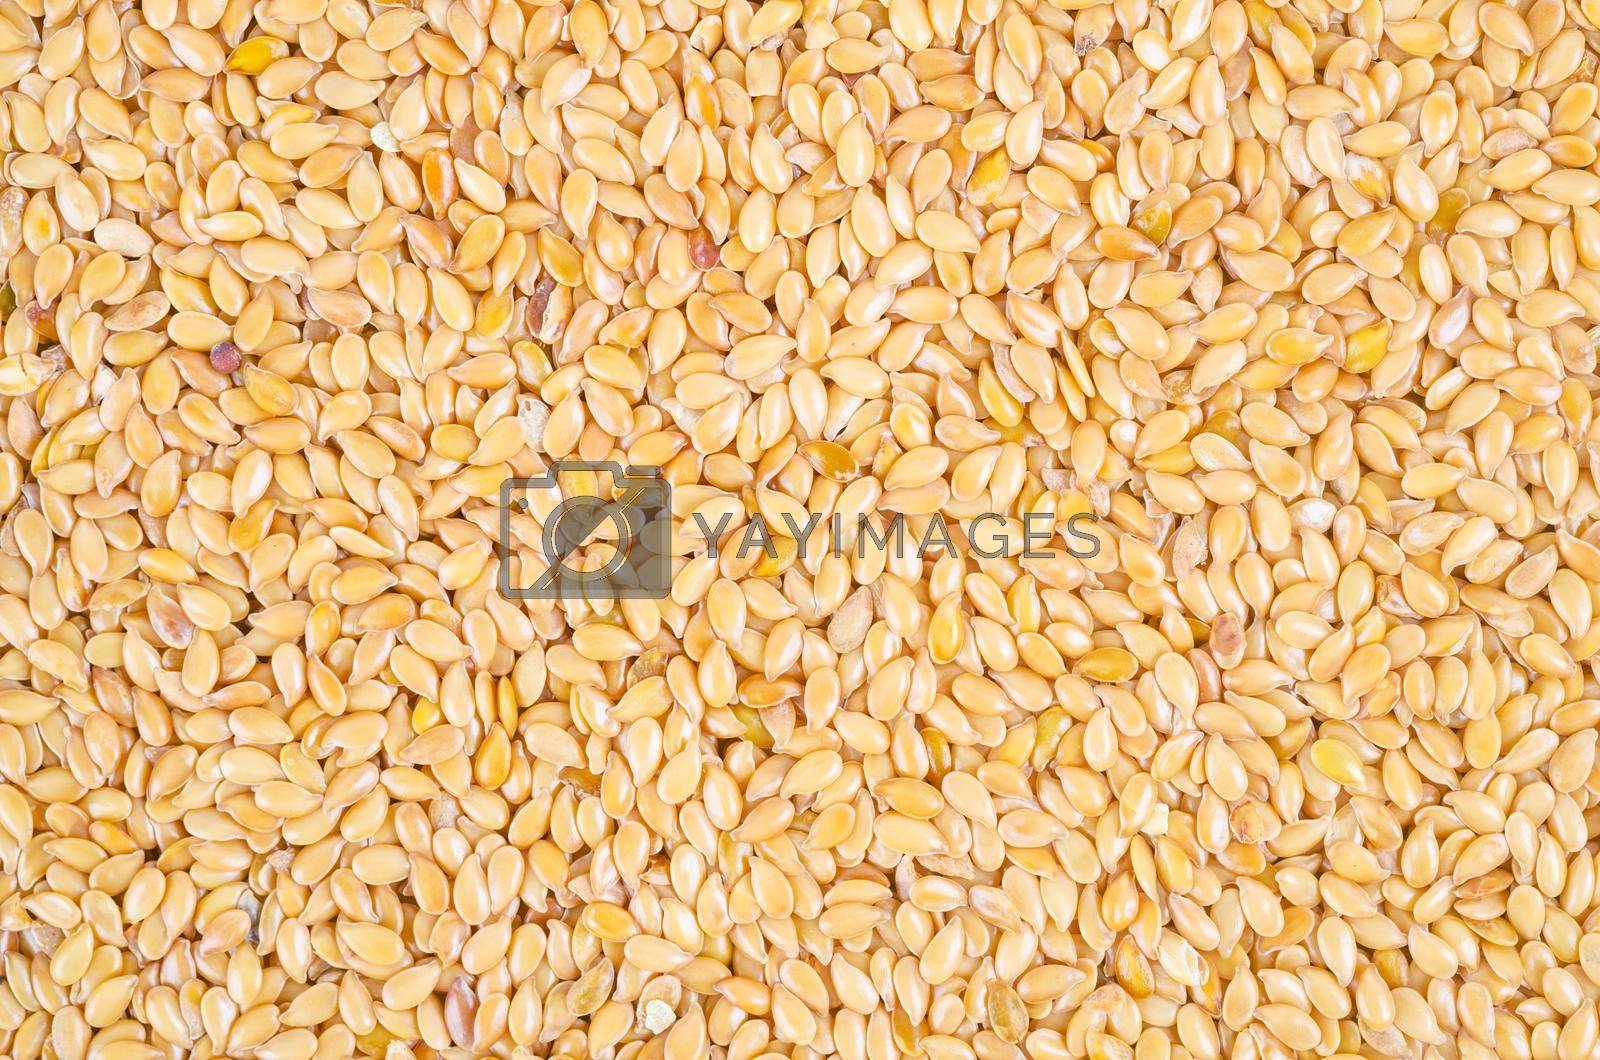 The Gold flax seeds texture as background.